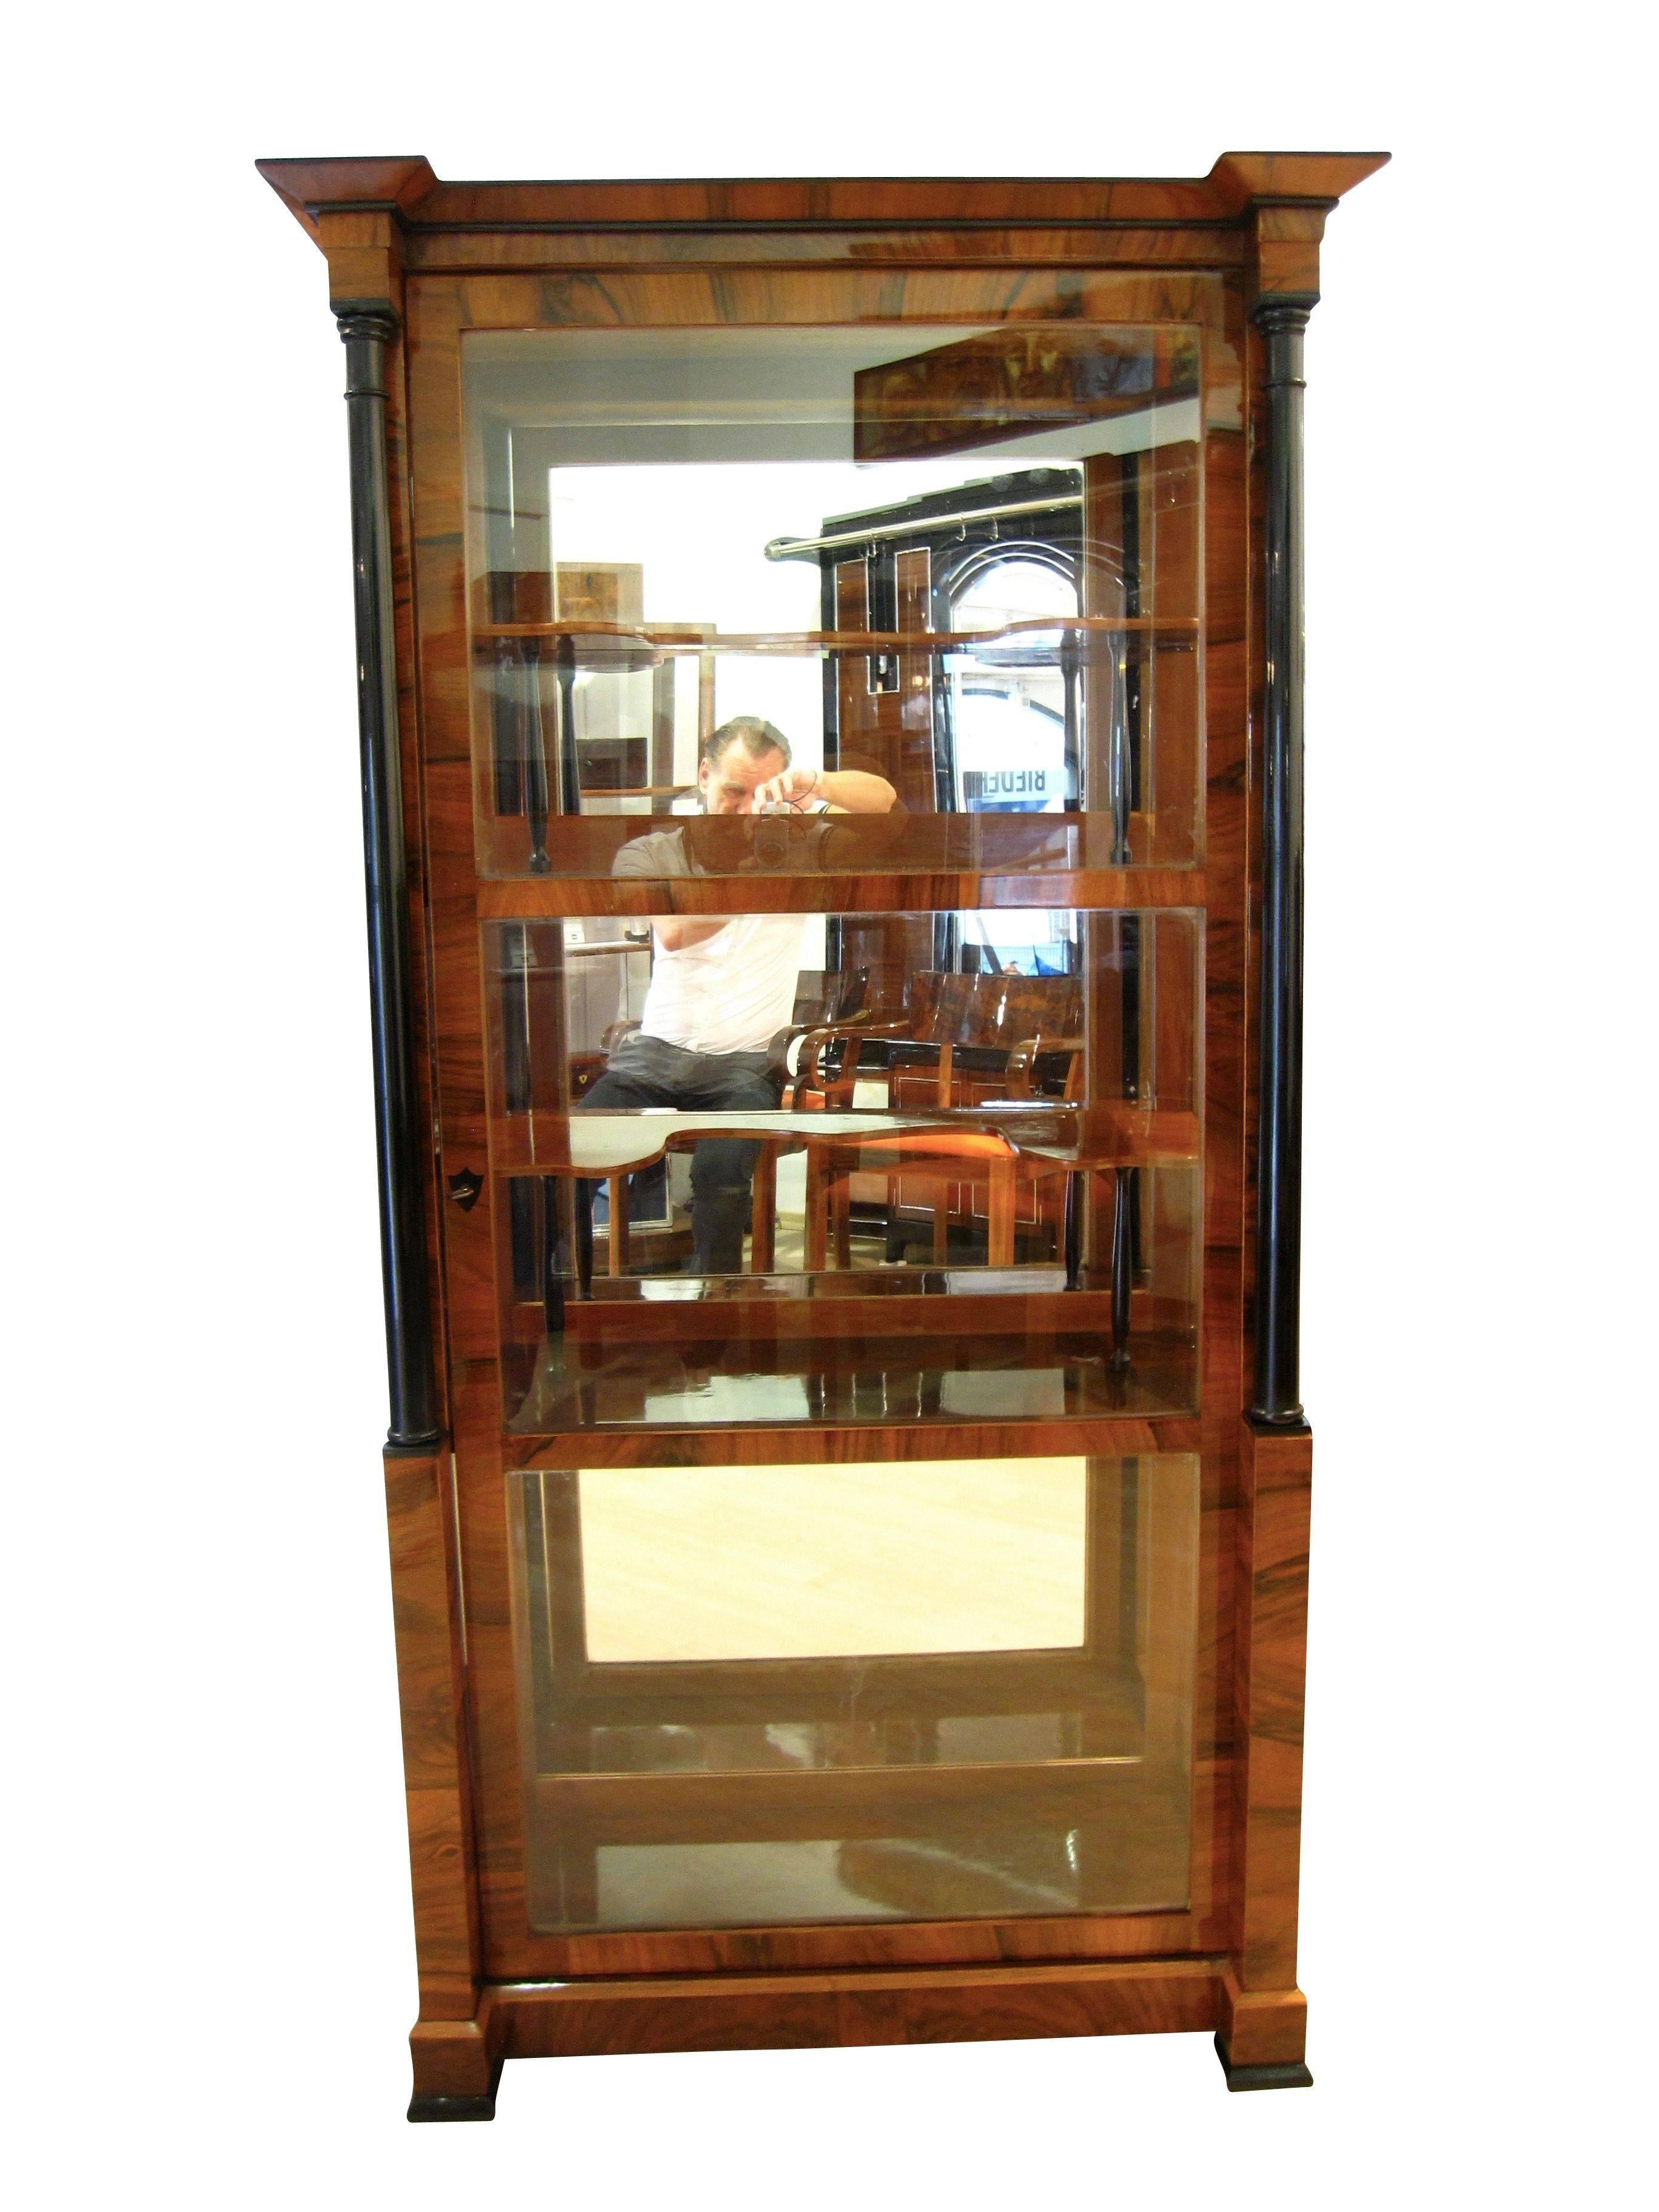 Beautiful, classic Vitrine with glass windows on three sides form the 19th century. The wood is walnut veneer and solid wood and it has two ebonized full columns. 
Inside there are two shelves and in between two smaller curved middle shelves with